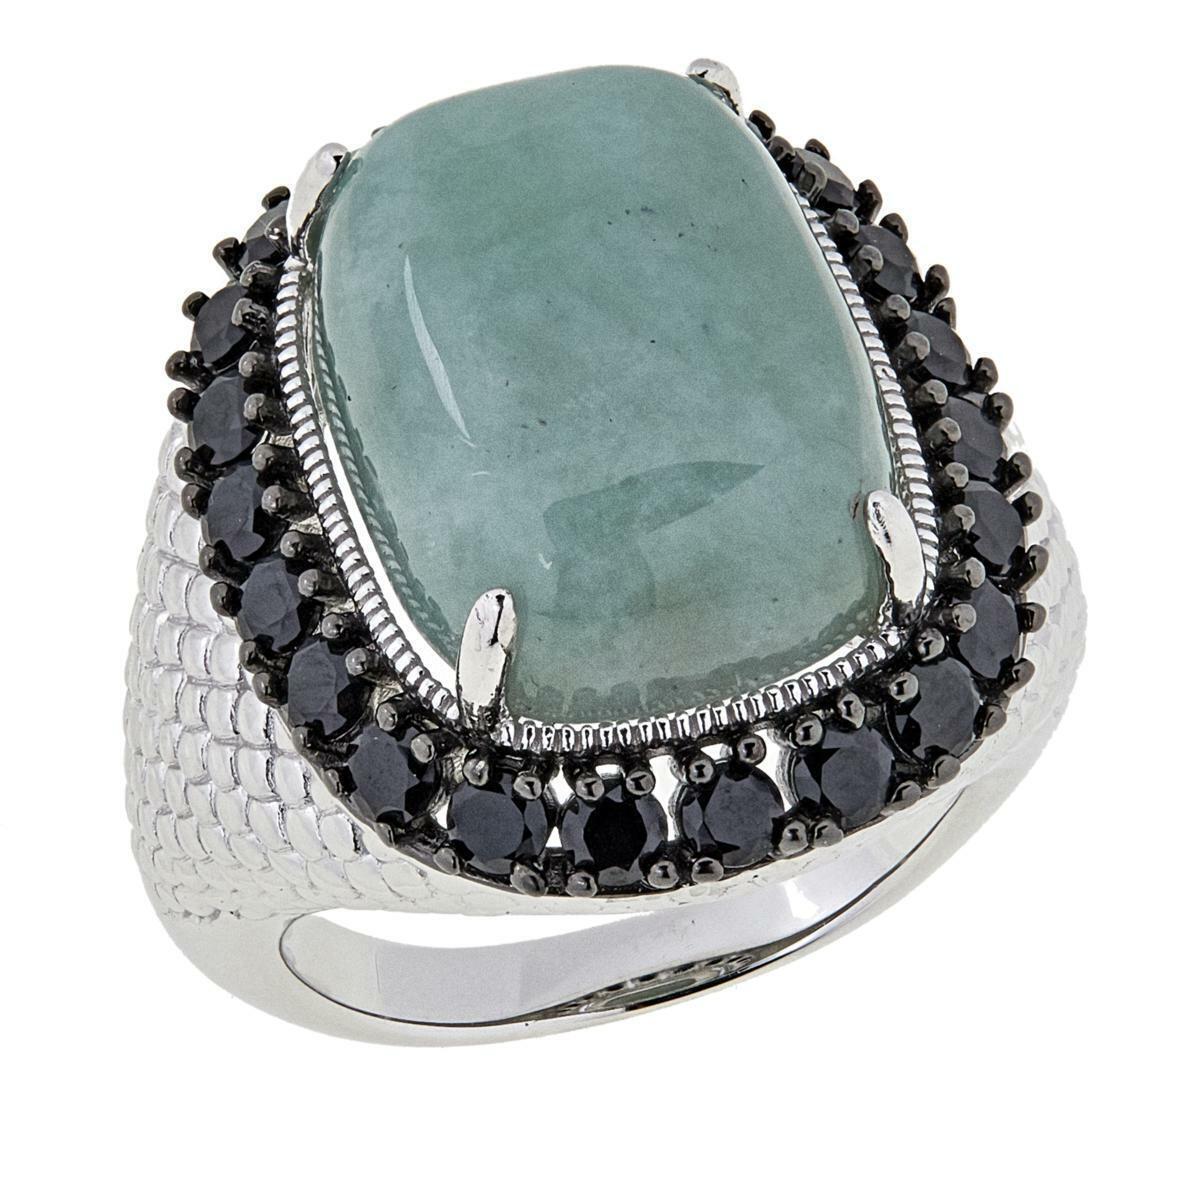 Jade of Yesteryear Sterling Silver Burmese Jade and Black Spinel Ring, Size 6